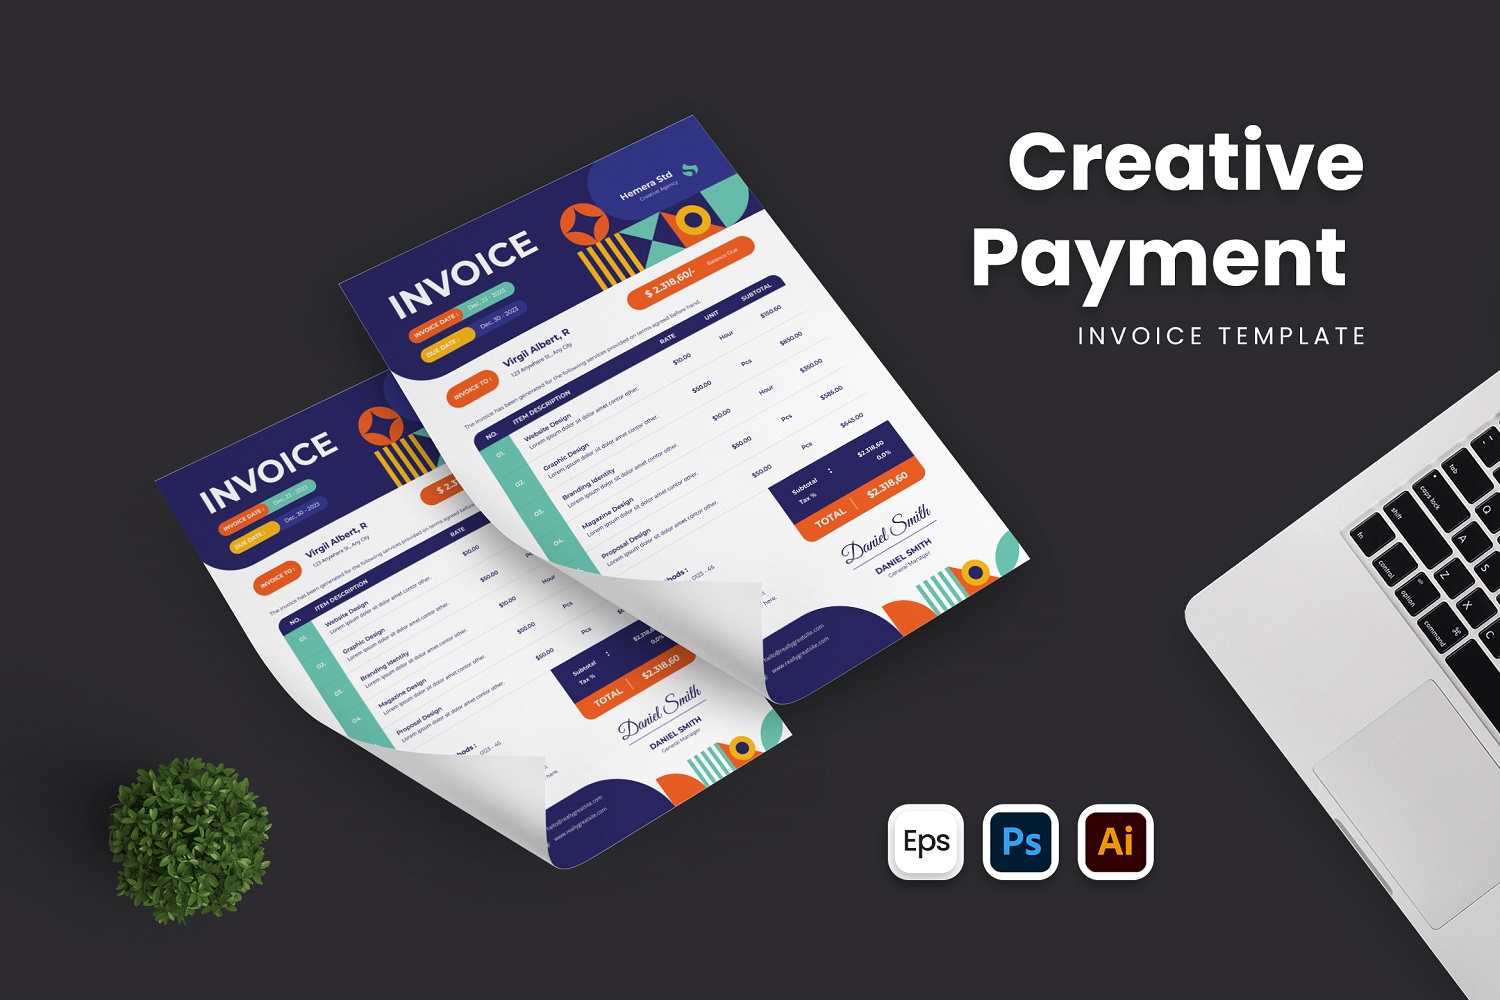 Creative Payment Invoice Template